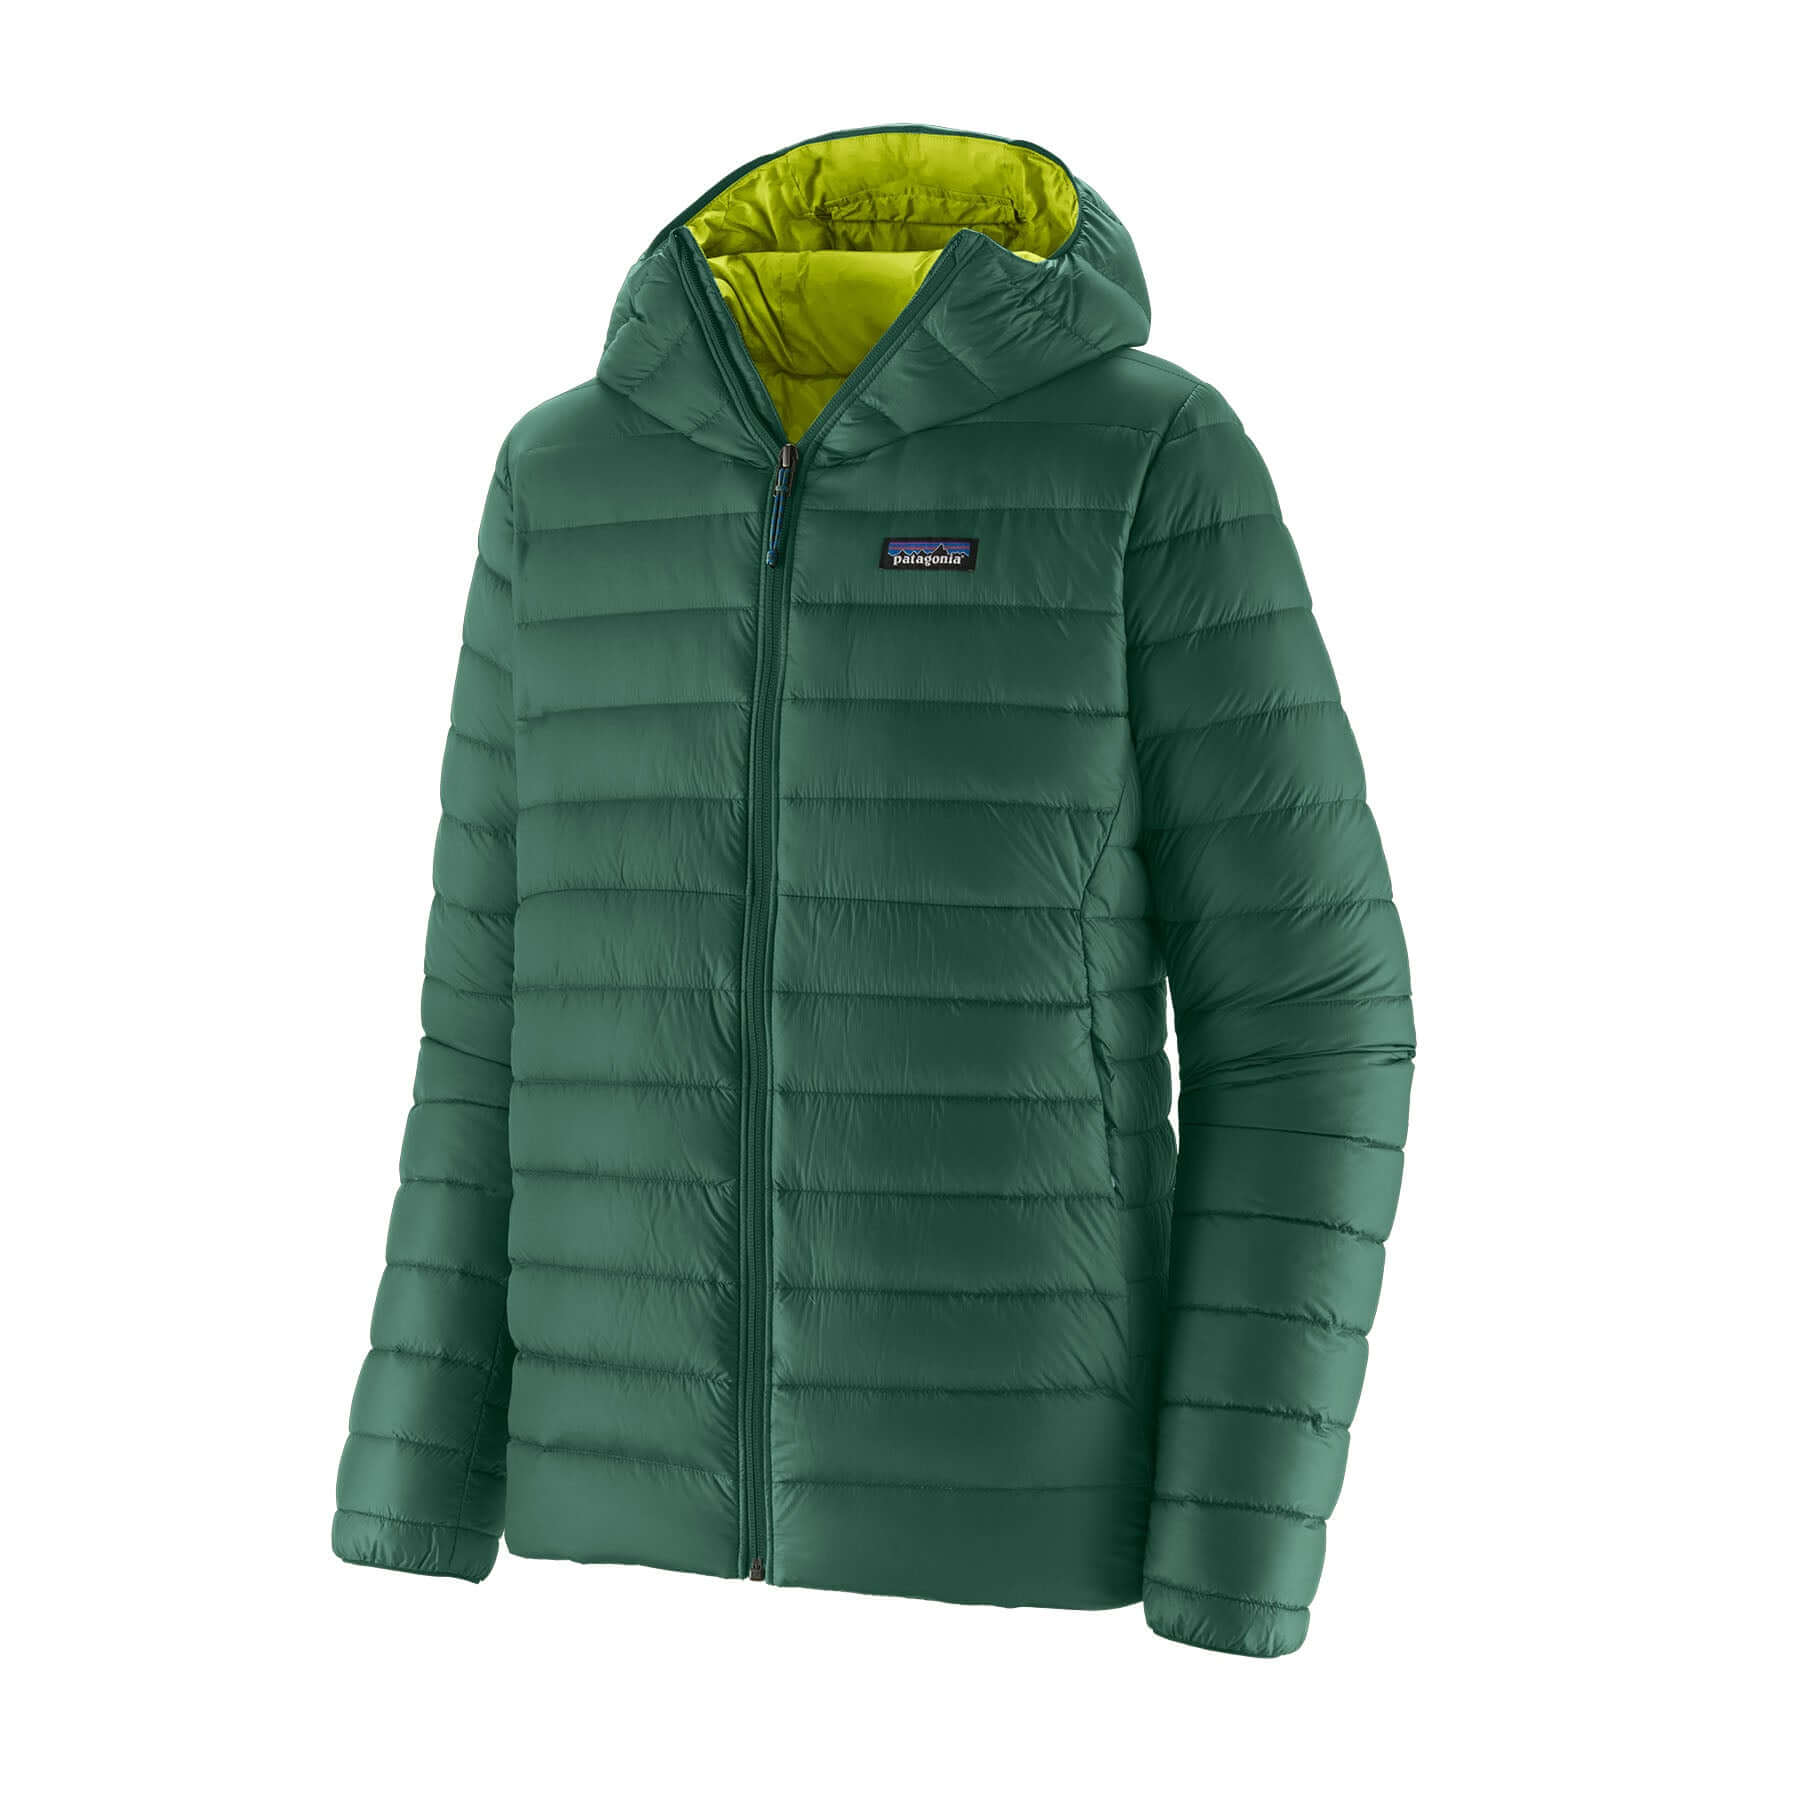 Patagonia Bend - Patagonia has partnered with Bureo and introduced a new  lineup of NetPlus products, such as the Men's and Women's Downdrift jacket.  Collaborating to keep our oceans healthy, these jacket's